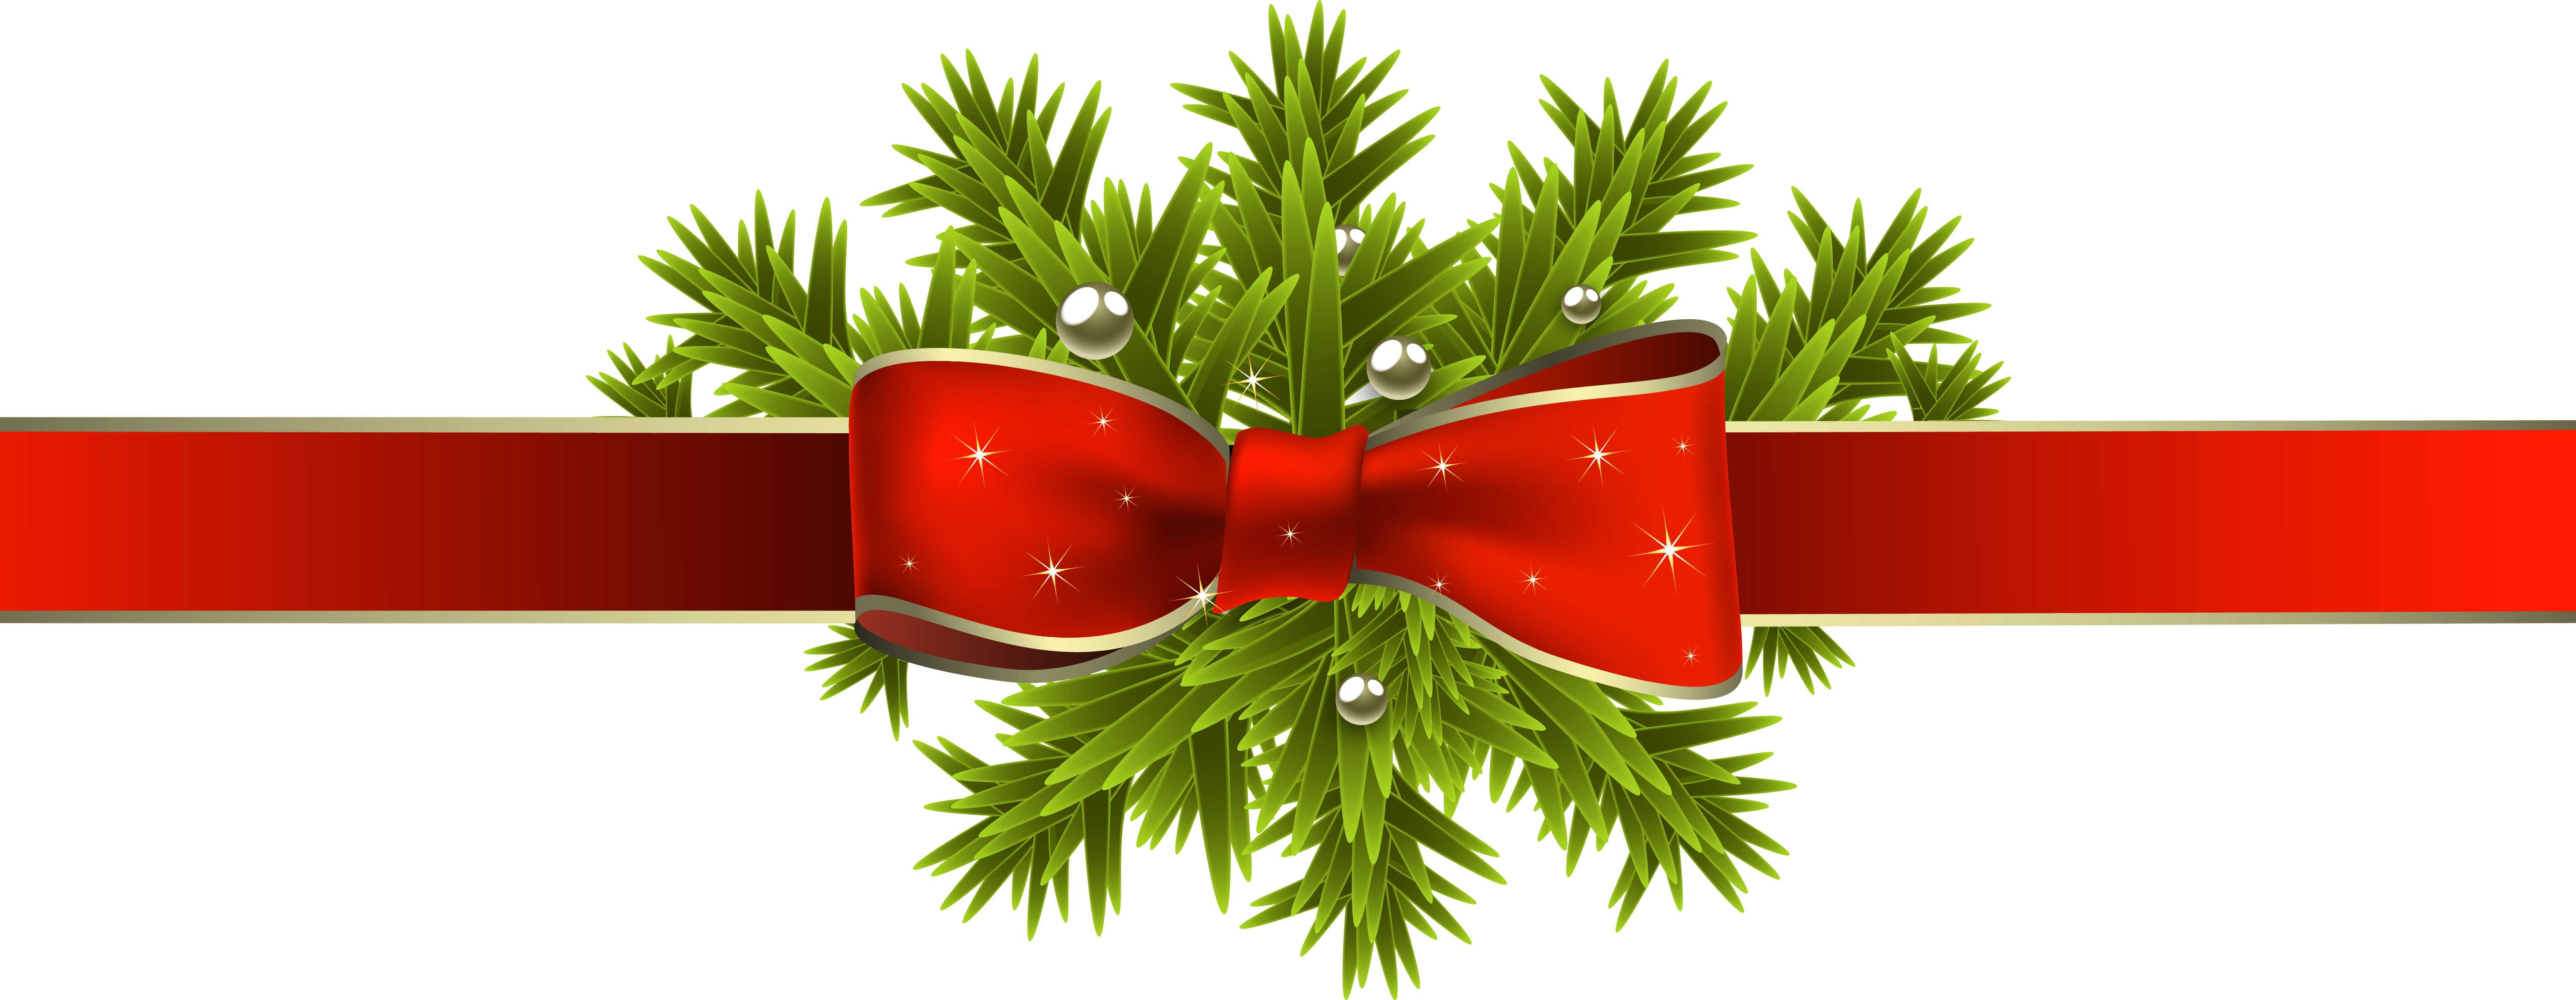 Red Christmas Ribbon with Pine Branches PNG Clipart Image.